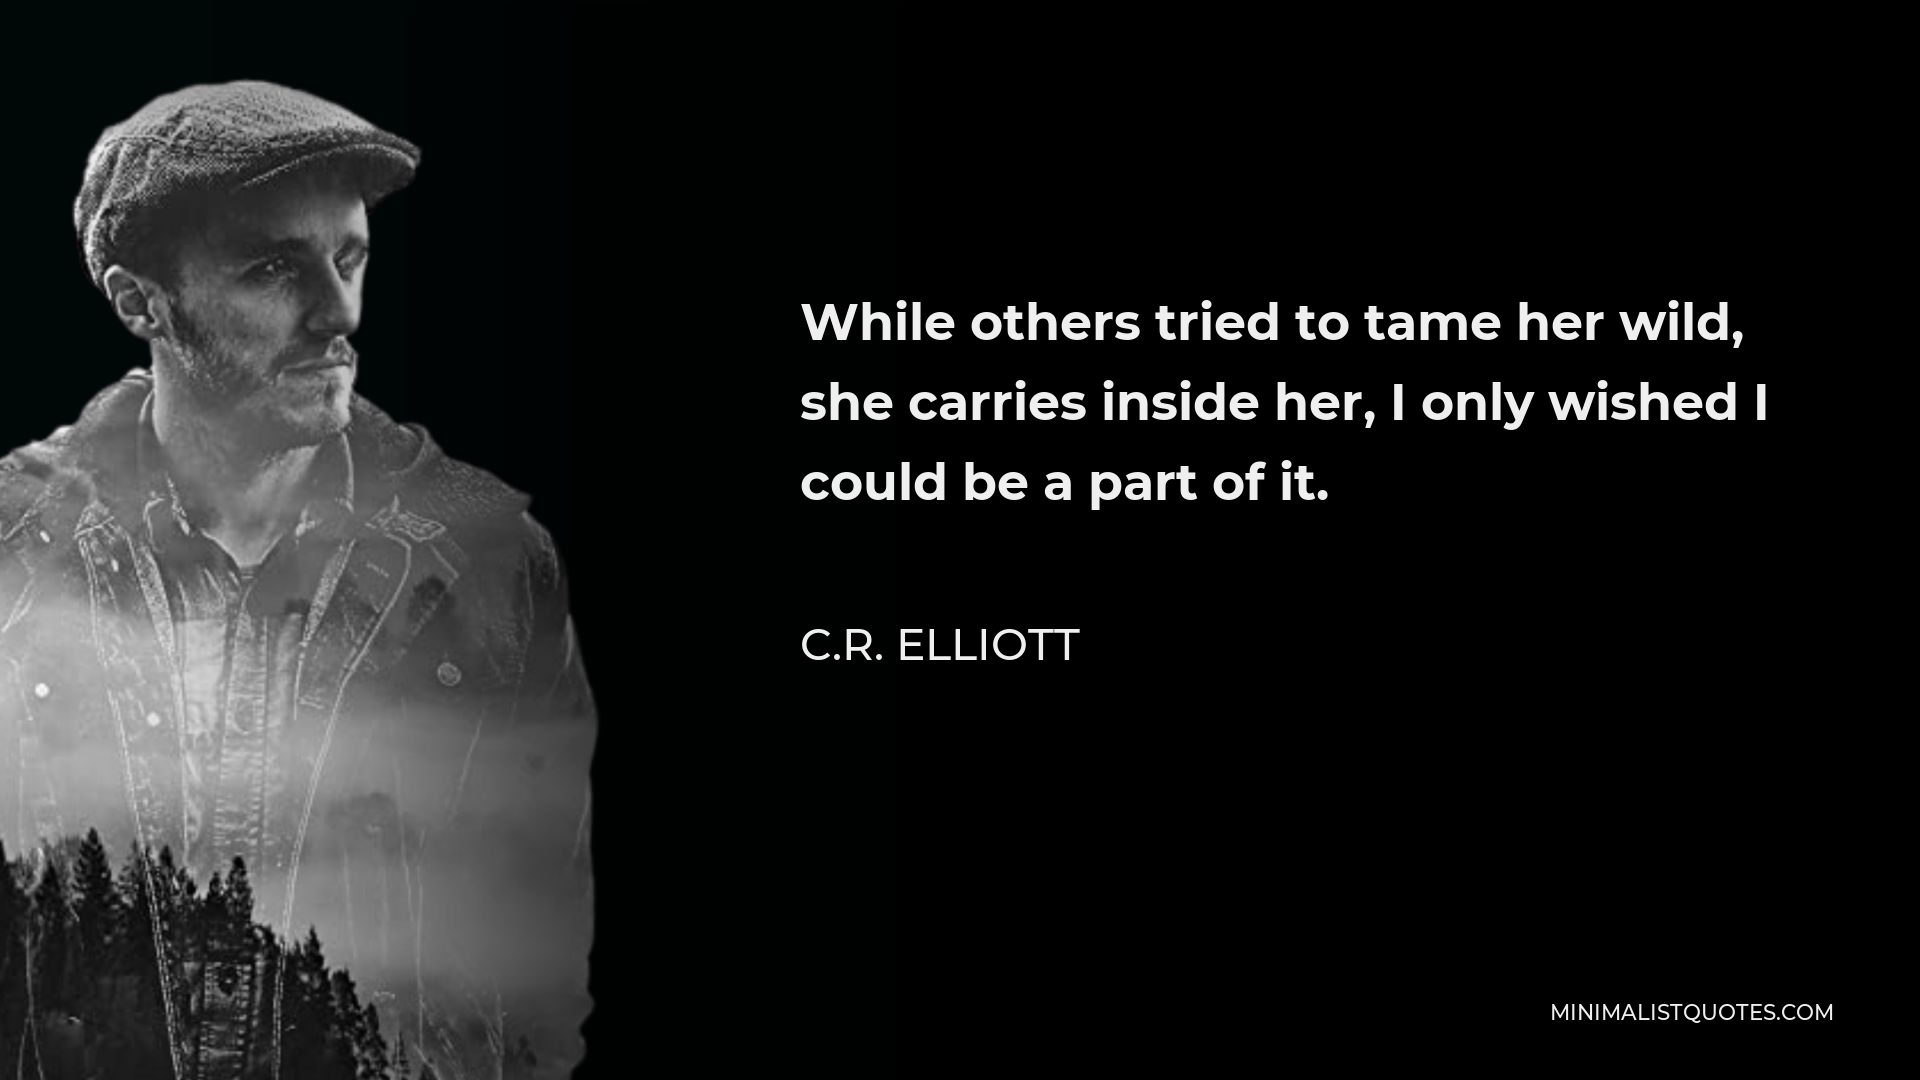 C.R. Elliott Quote - While others tried to tame her wild, she carries inside her, I only wished I could be a part of it.